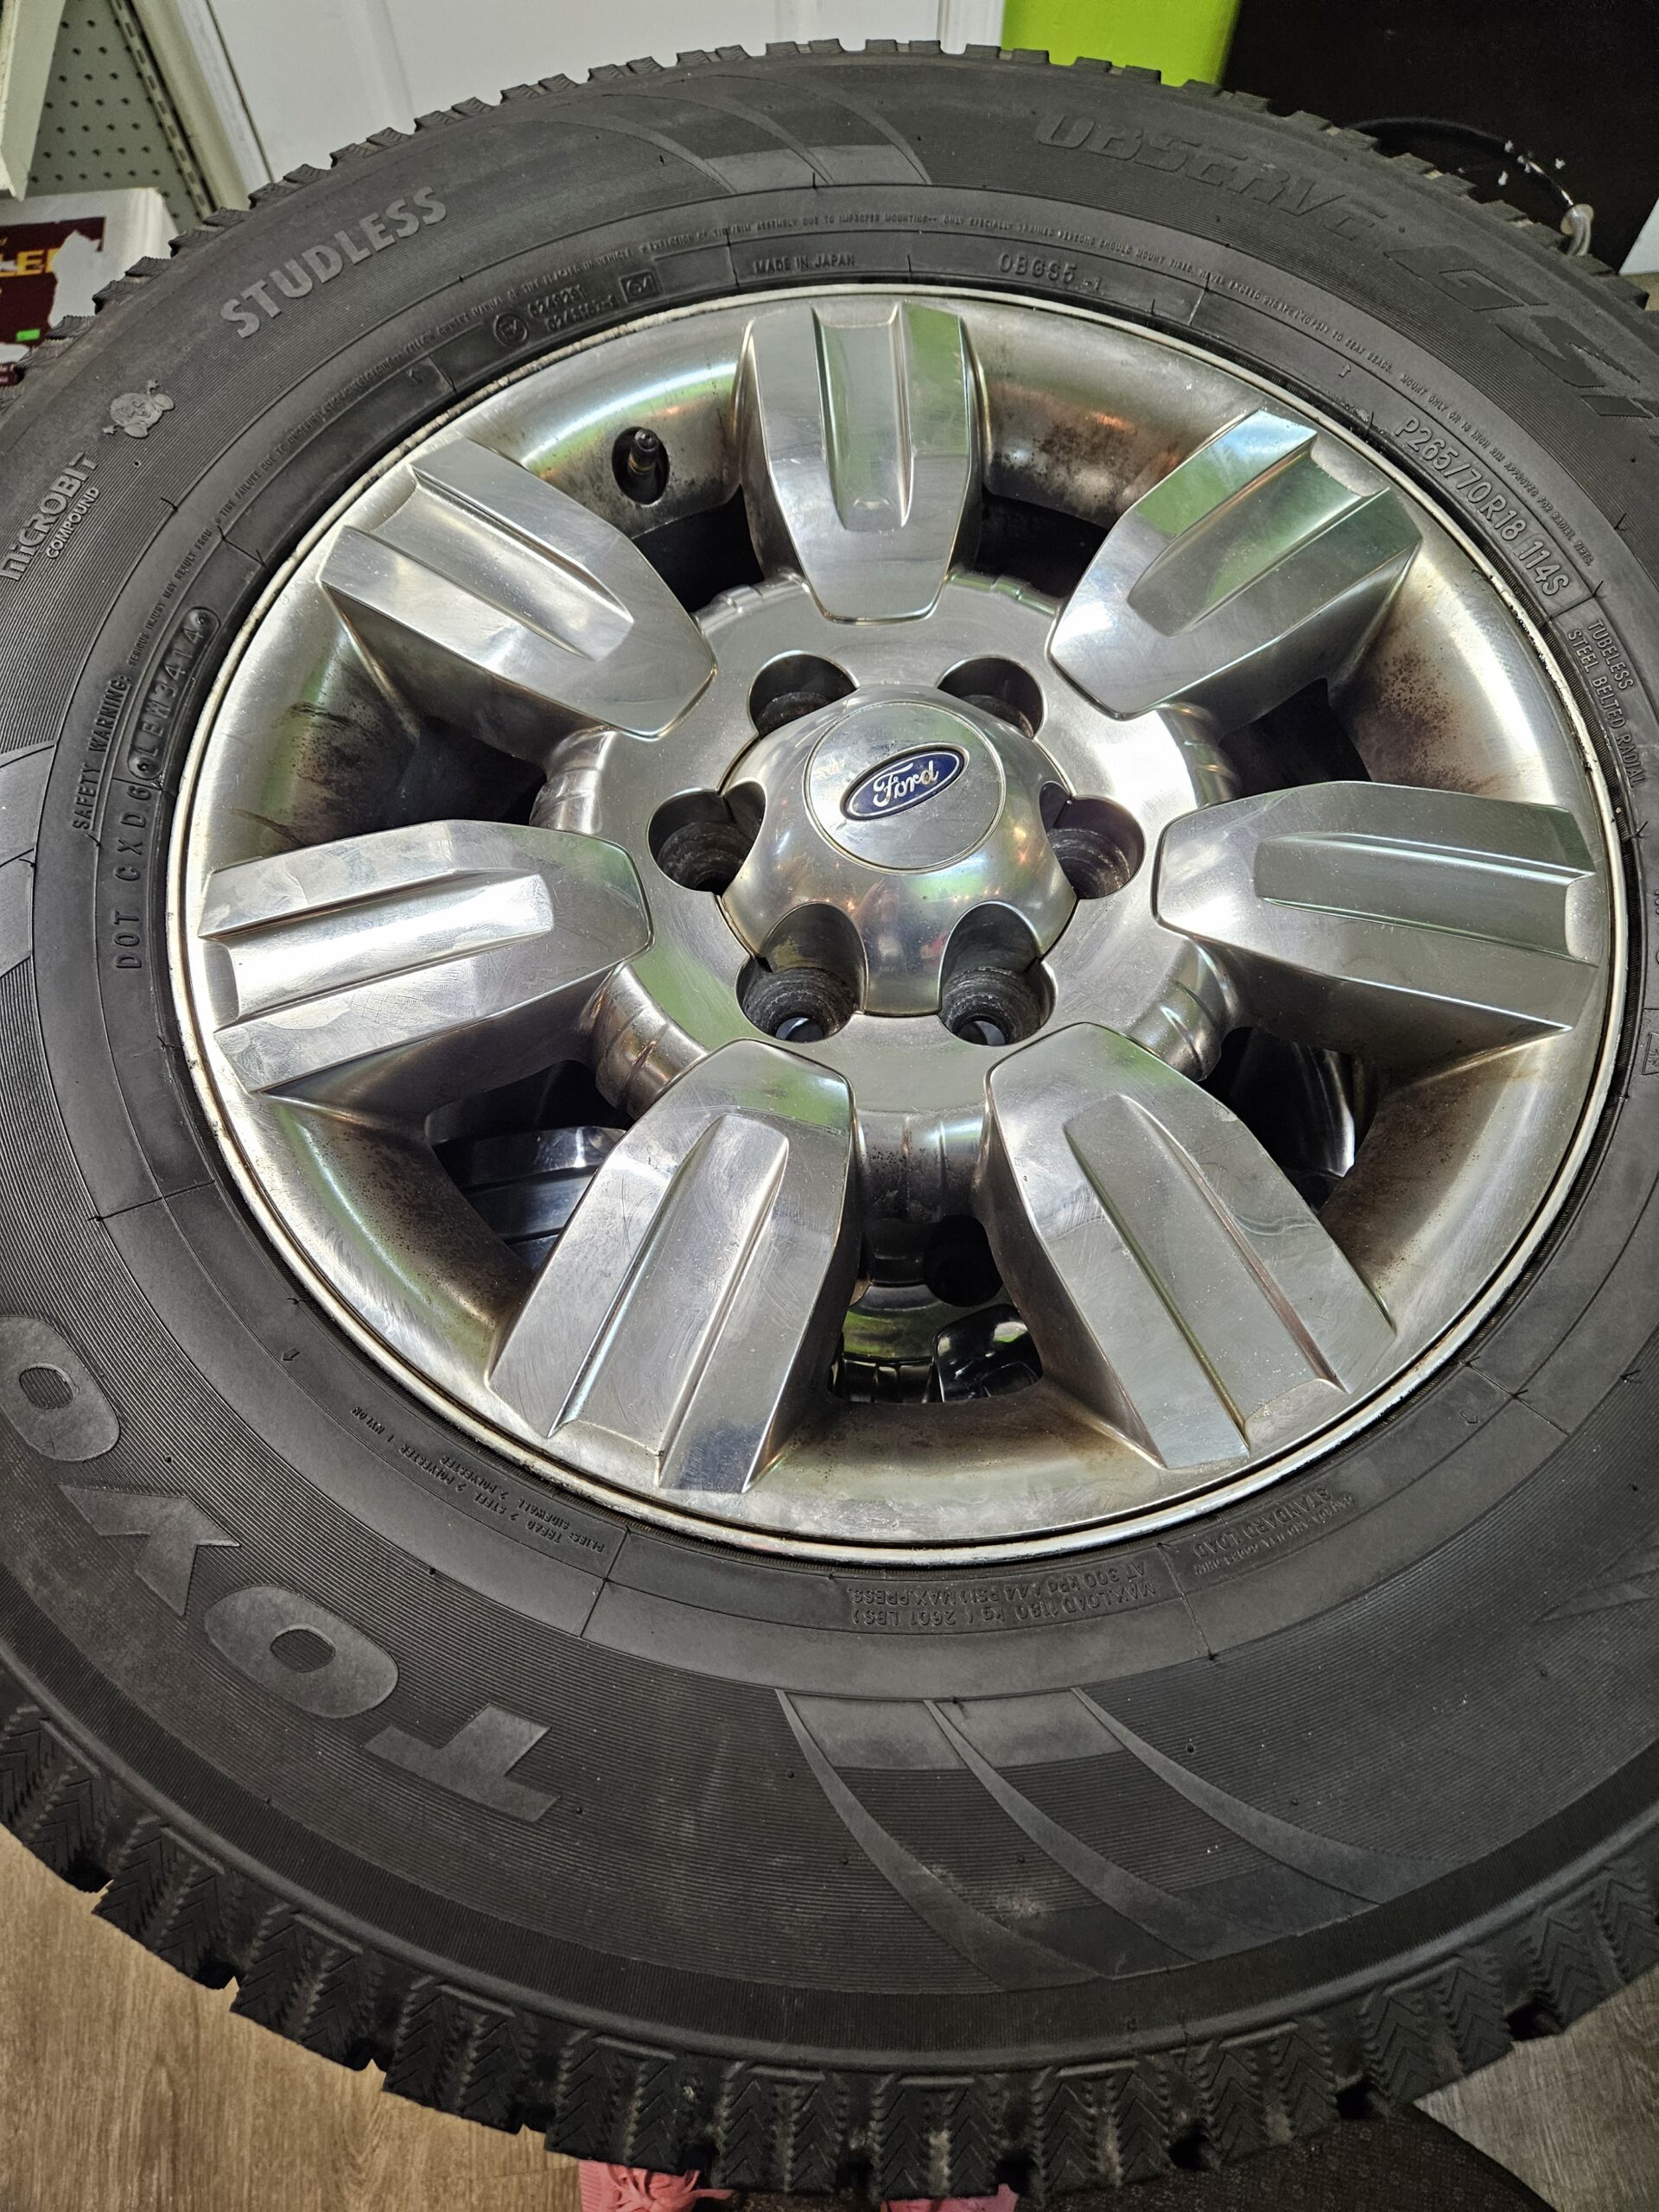 265/70R18 Toyo Snow Tires on Ford F150 Rims